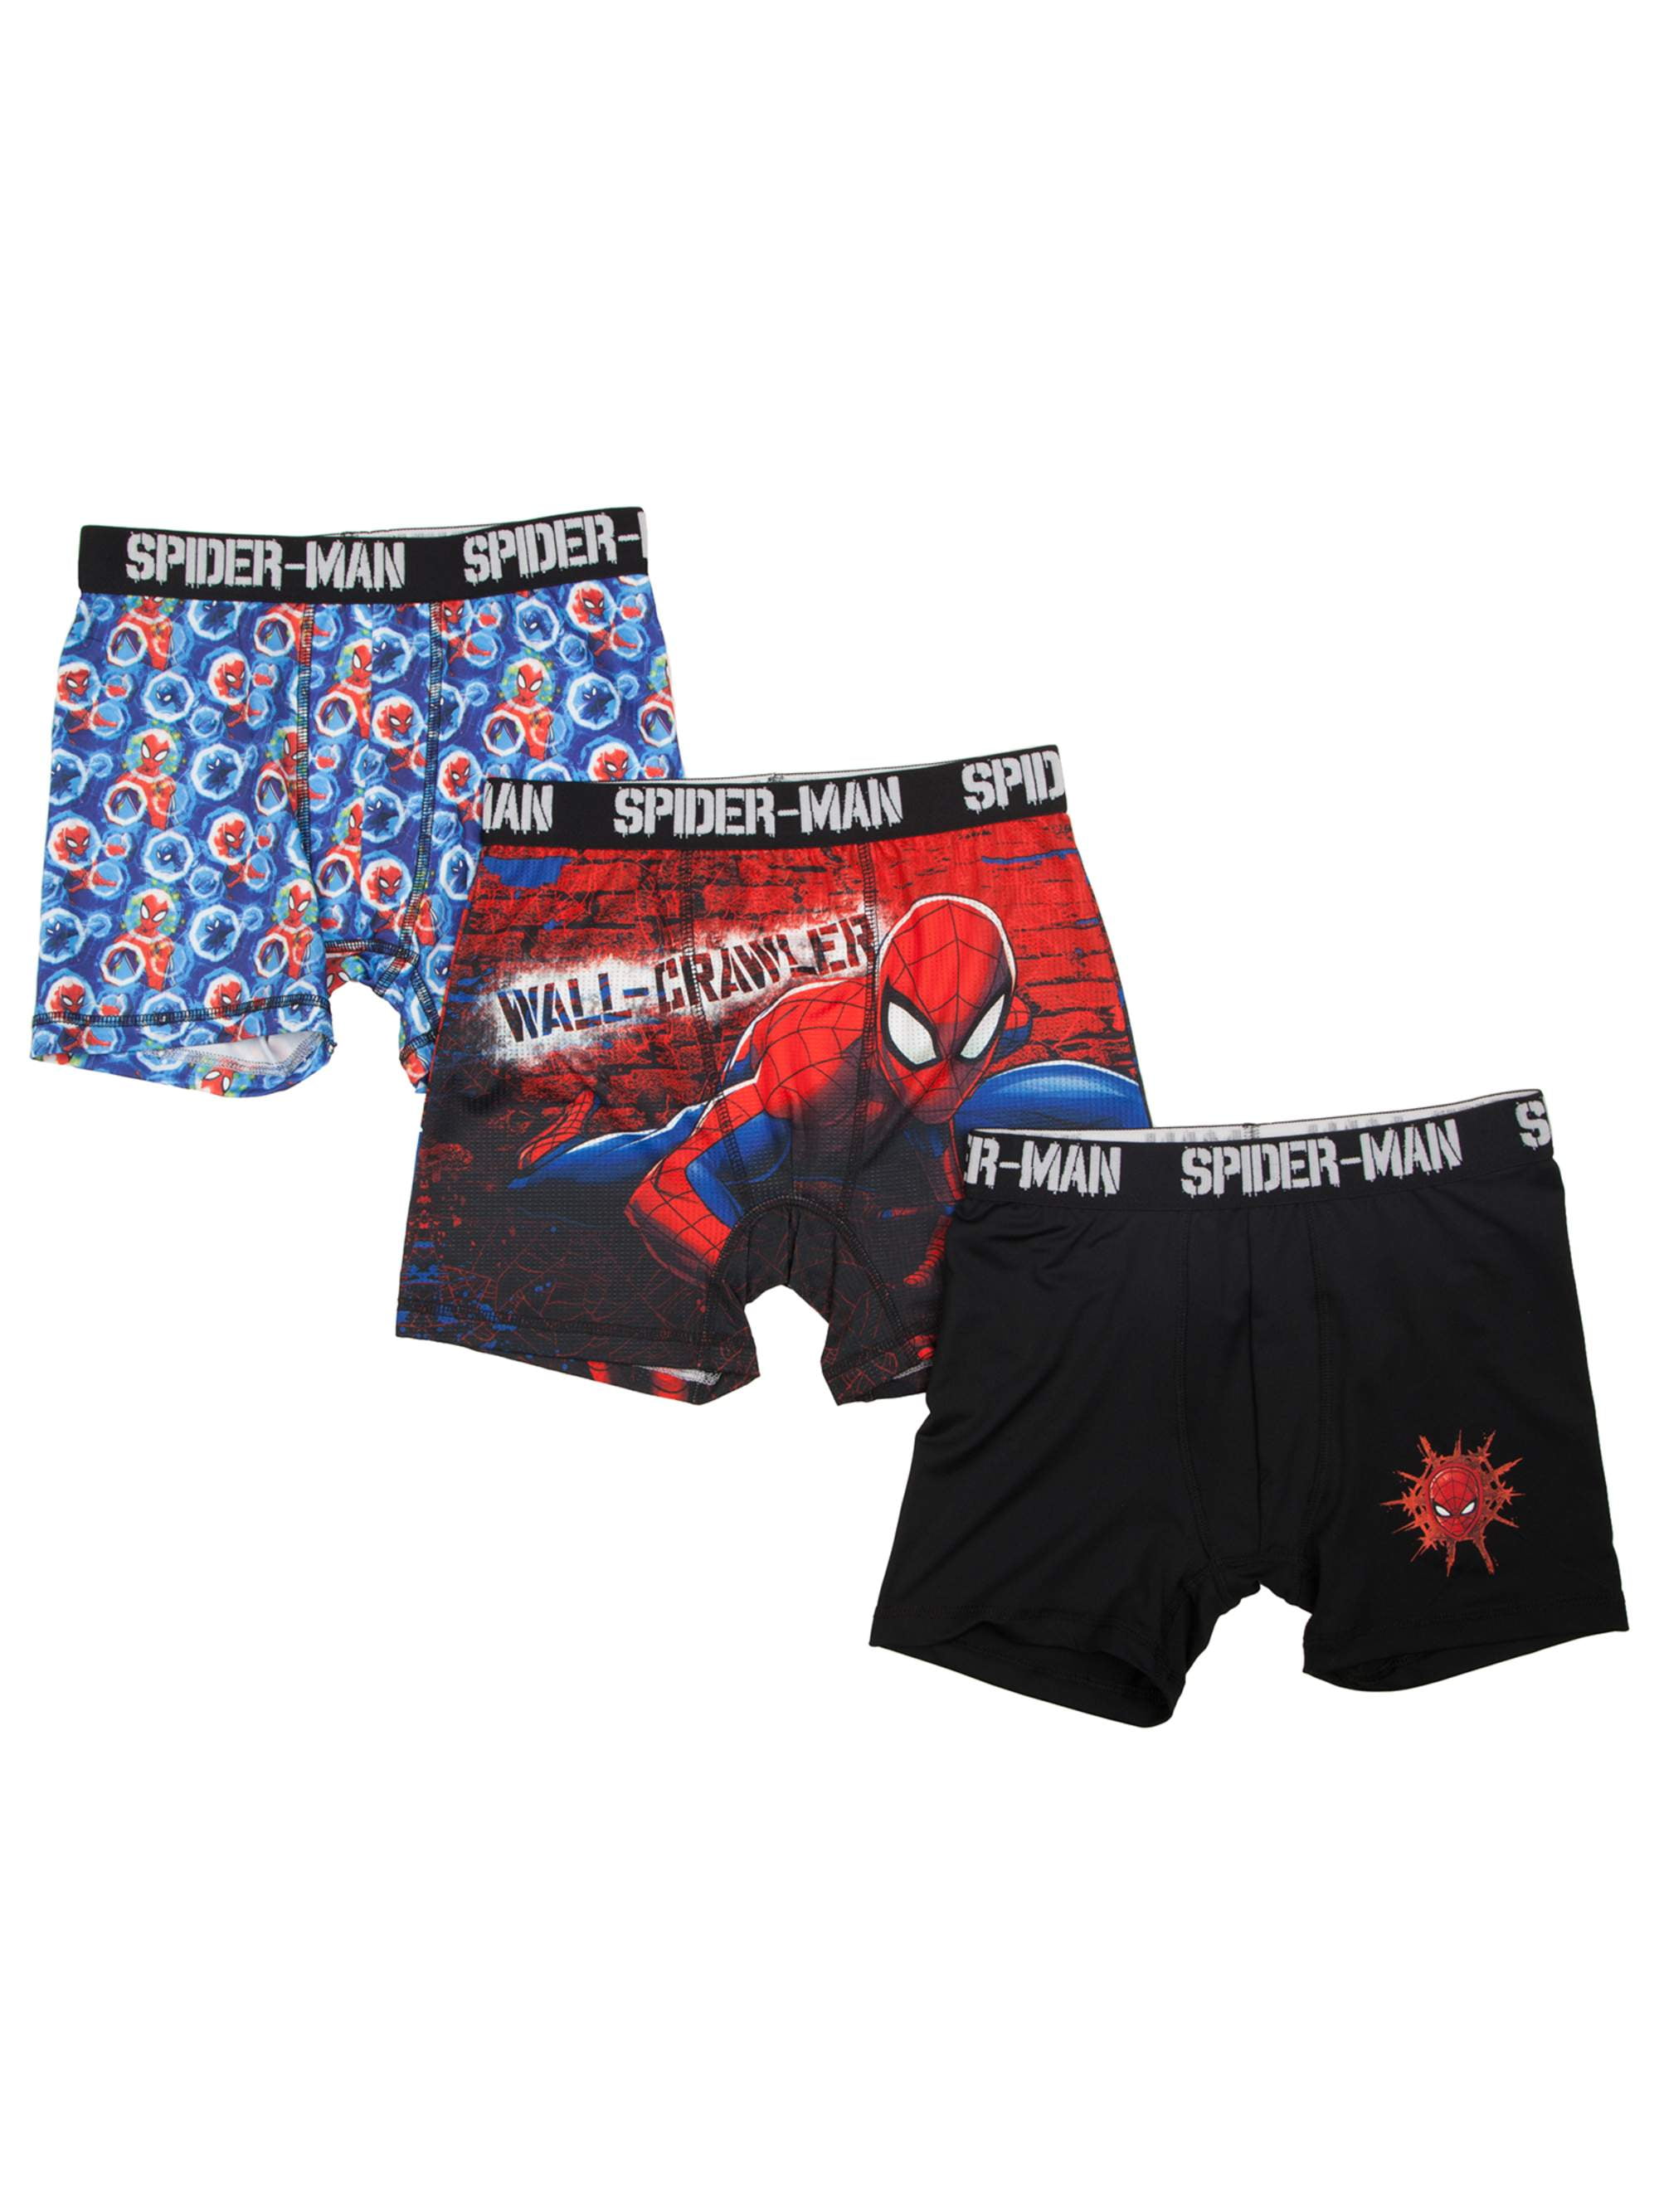 BOYS SPIDERMAN UNDERWEAR Boxer Briefs Size 8 Marvel Fruit of Loom 3 pack  NWT $11.99 - PicClick